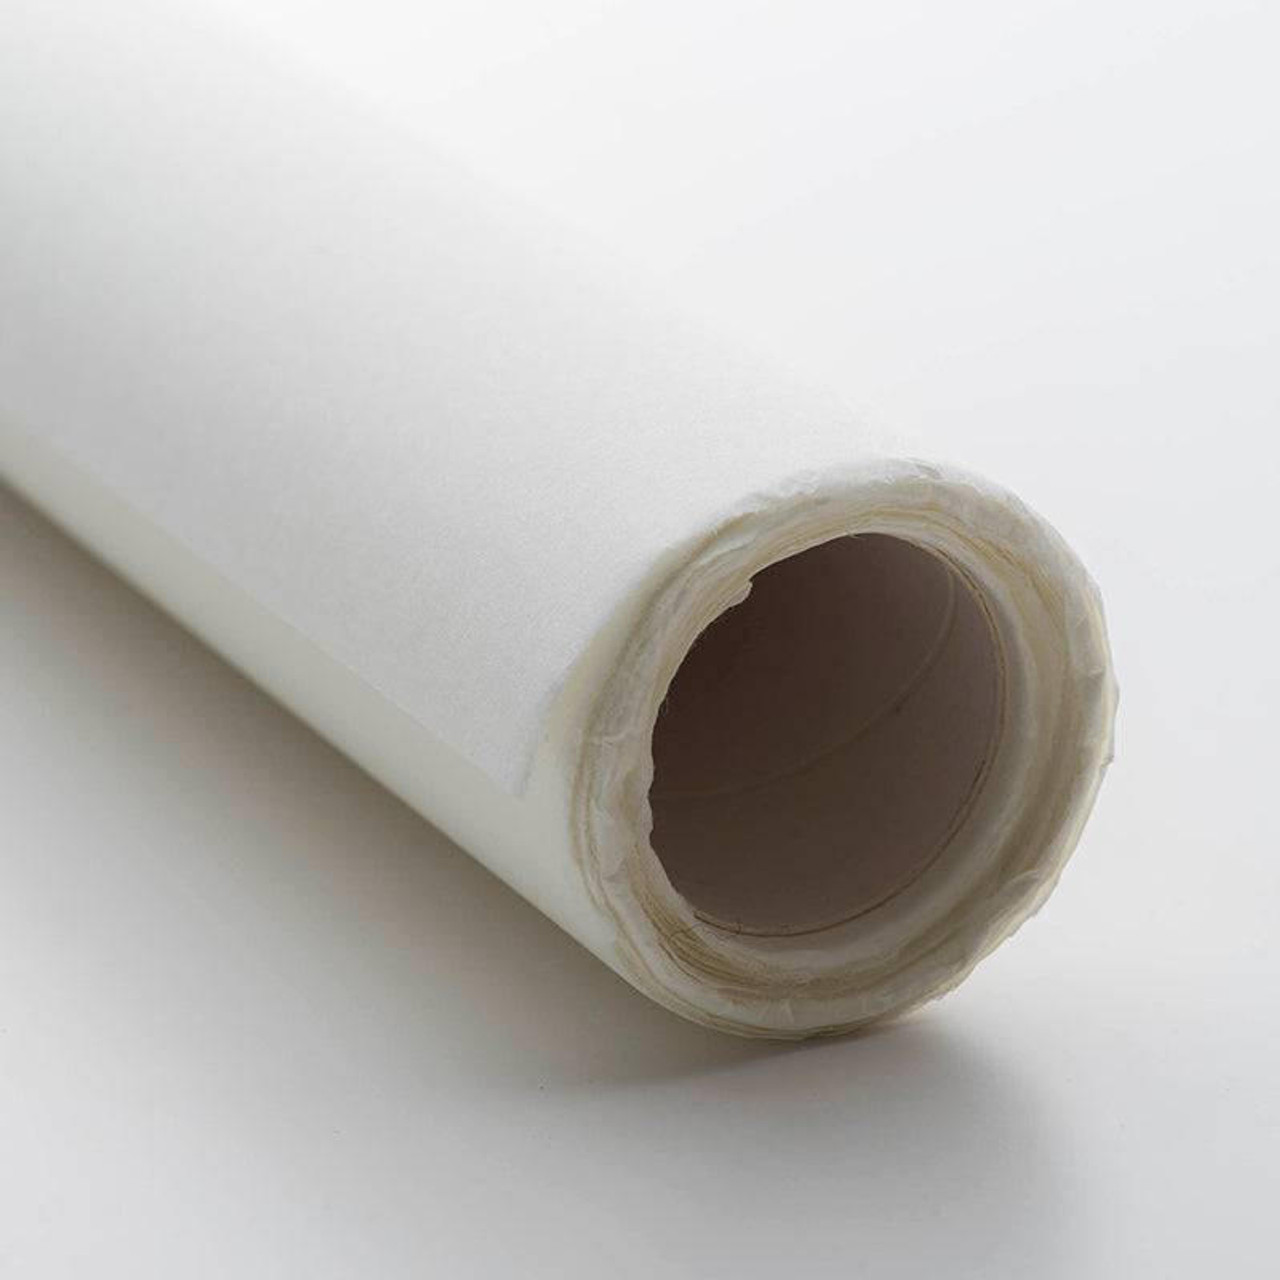 Mulberry Paper Roll - Thick - 52gsm - 38x10.9yd - Sam Flax Atlanta